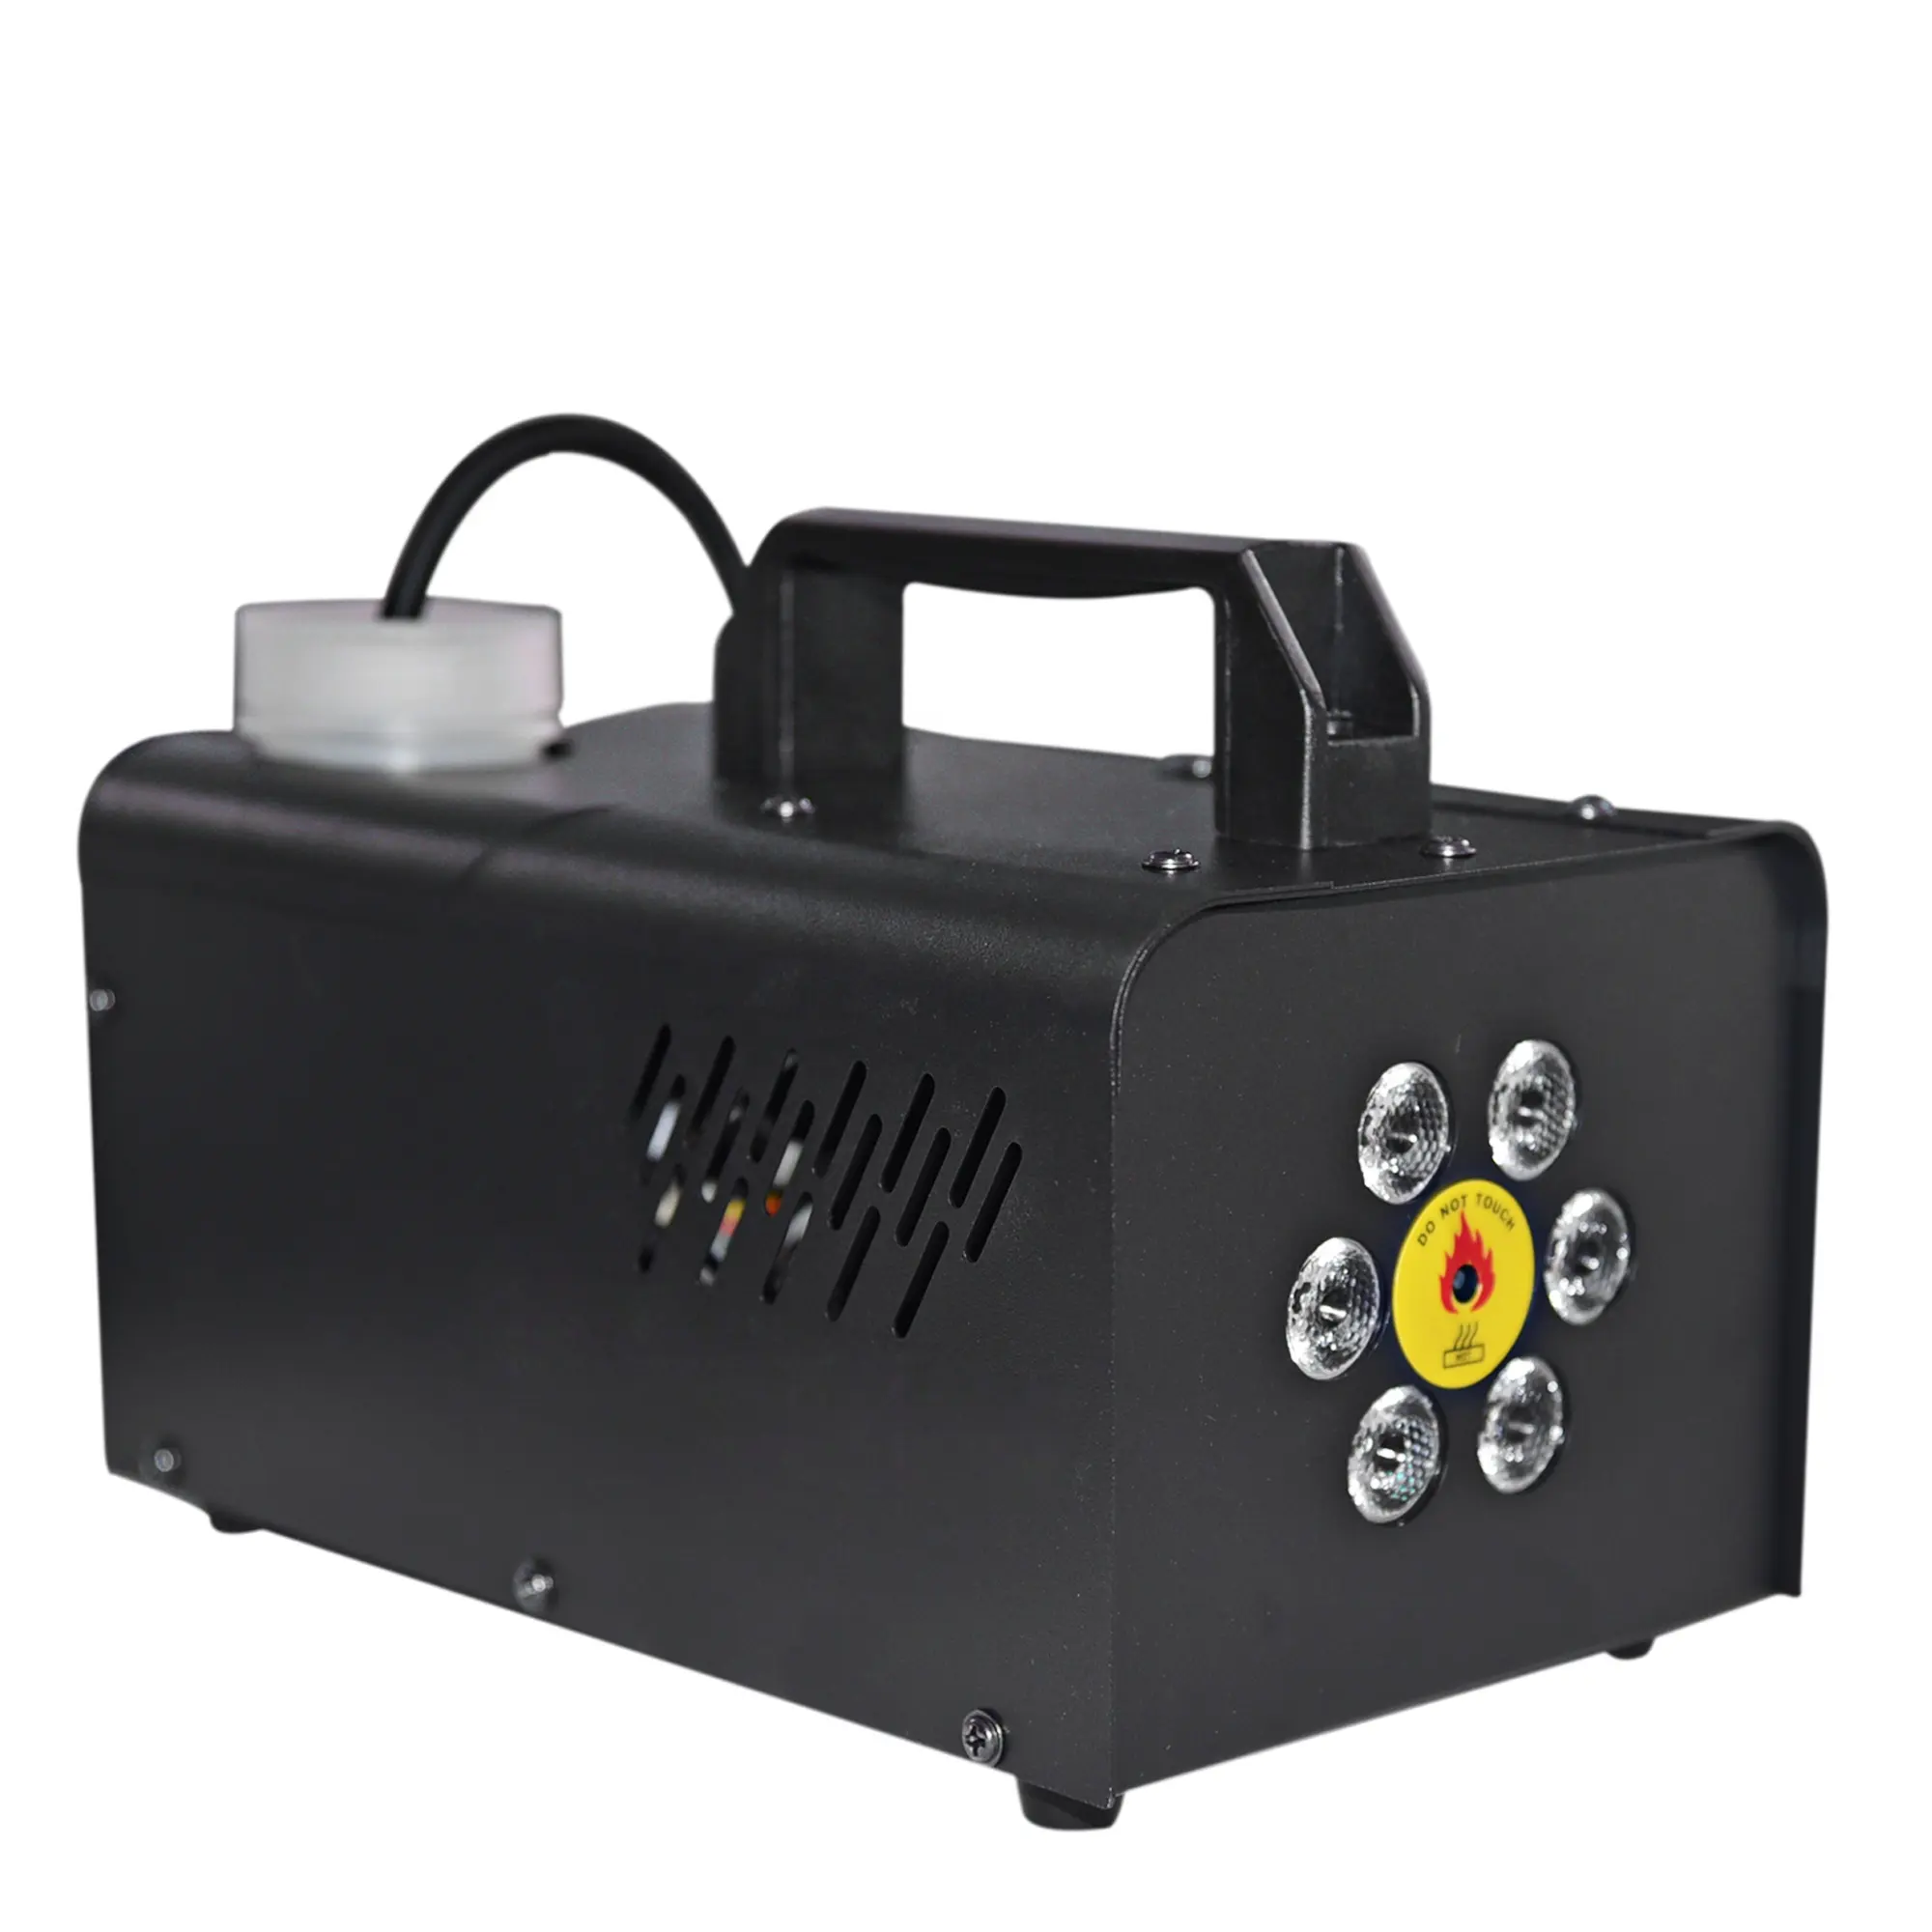 SITERUI SFX Customized 500W high cases LED fog machine Stage effects artificial smoke effects manufacturing equipment Indoor fog